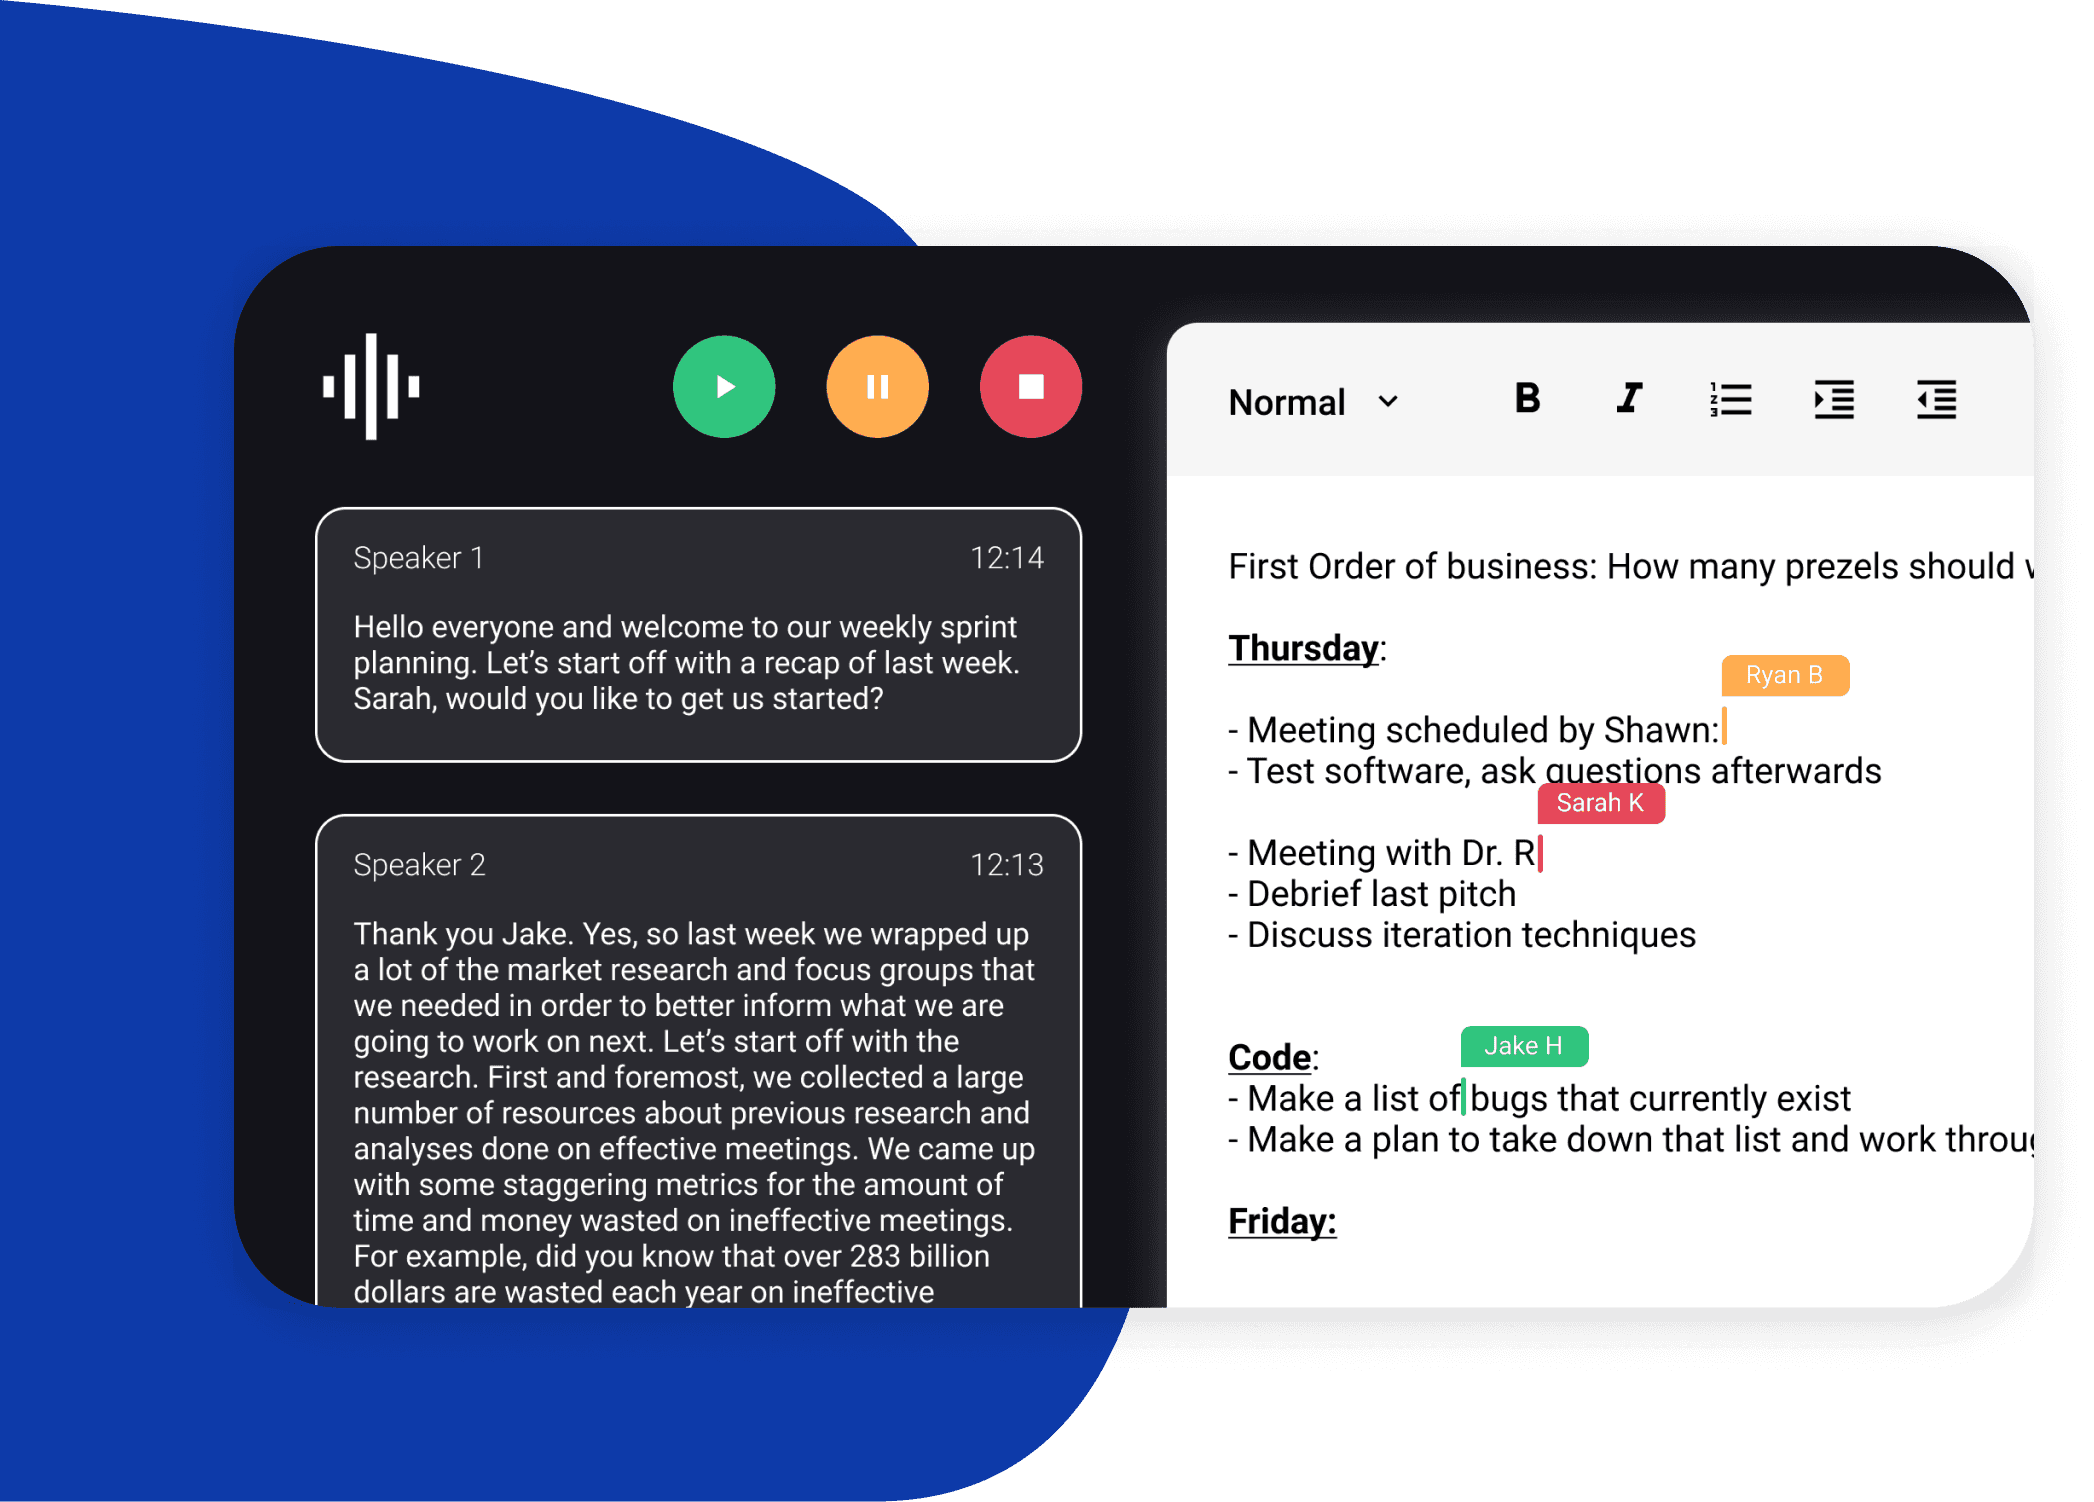 Knowtworthy real-time transcription and collaborative editing.